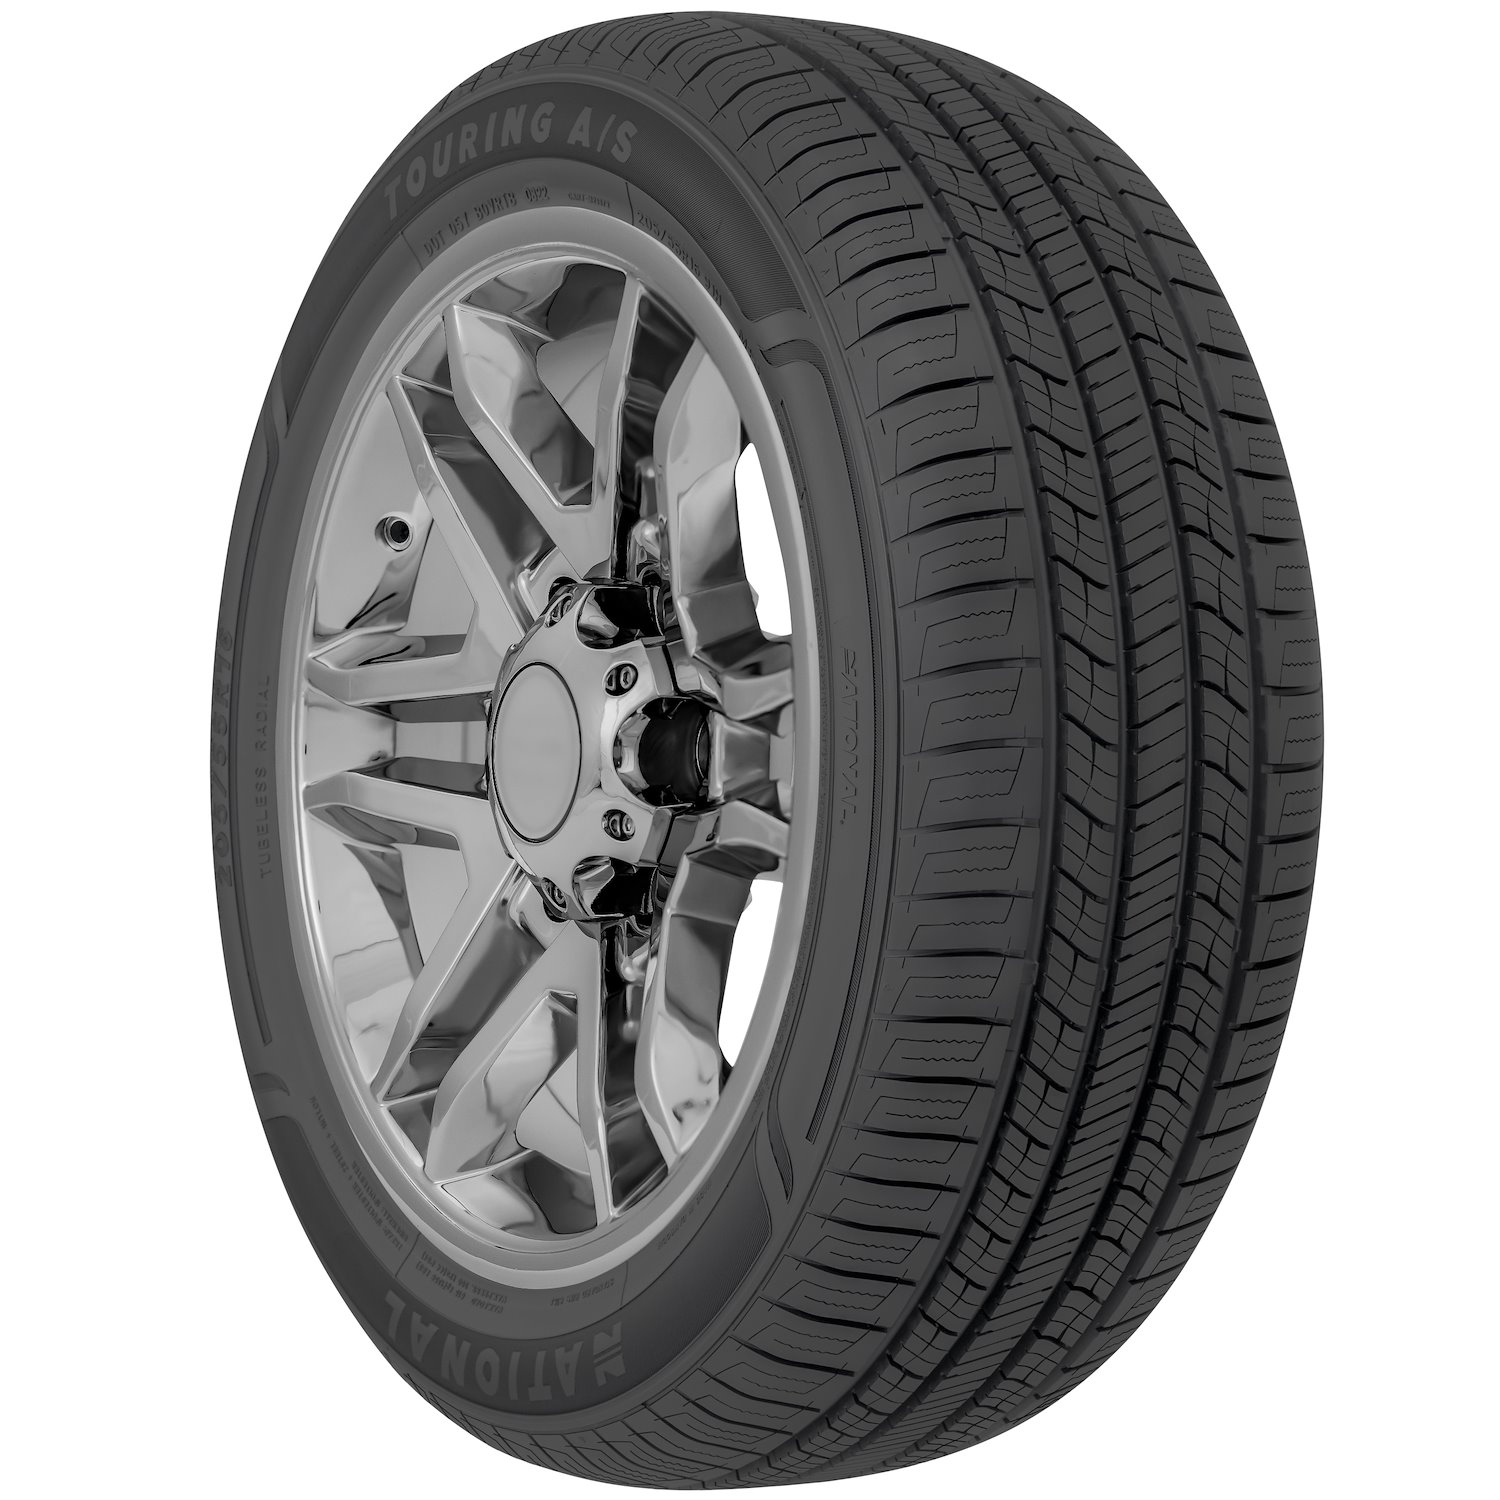 NLR18 Touring A/S Tire, 205/60R16